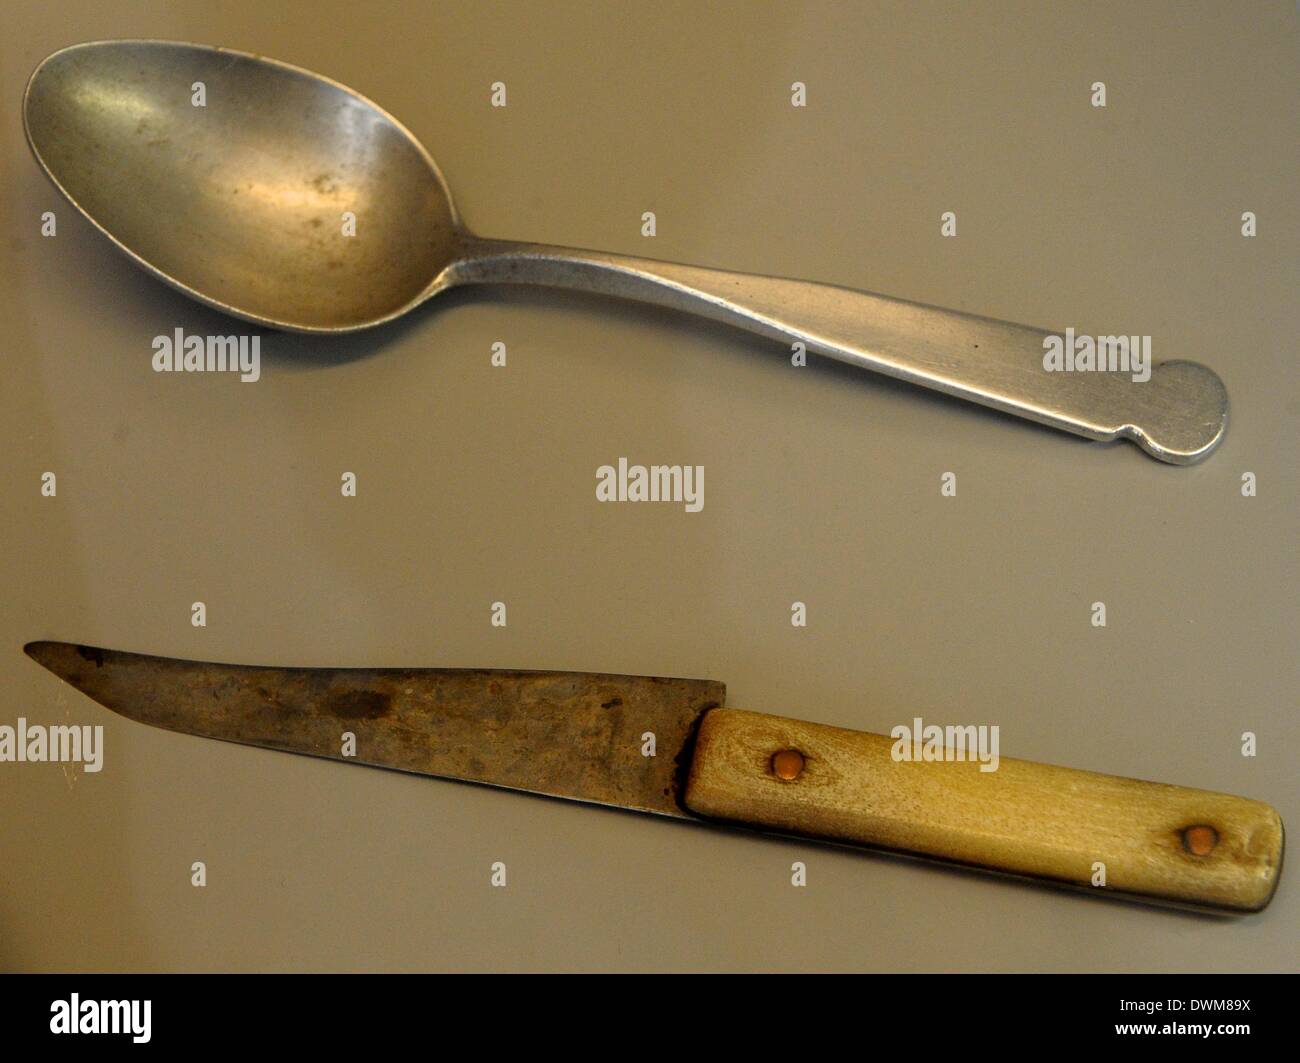 Leipzig, Germany. 11th Mar, 2014. An original self-made spoon (top) and a self-made knife with bony grip which were produced and used by Soviet prisoners are on display at the exhibition 'Gulag. Traces and evidences' at the Forum of Contemporary History Leipzig in Leipzig, Germany, 11 March 2014. The exhibition focuses on the history of the system of criminal and forced labor camps in the former Soviet Union and runs from 12 March until 29 June 2014. Photo: PETER ENDIG/dpa/Alamy Live News Stock Photo